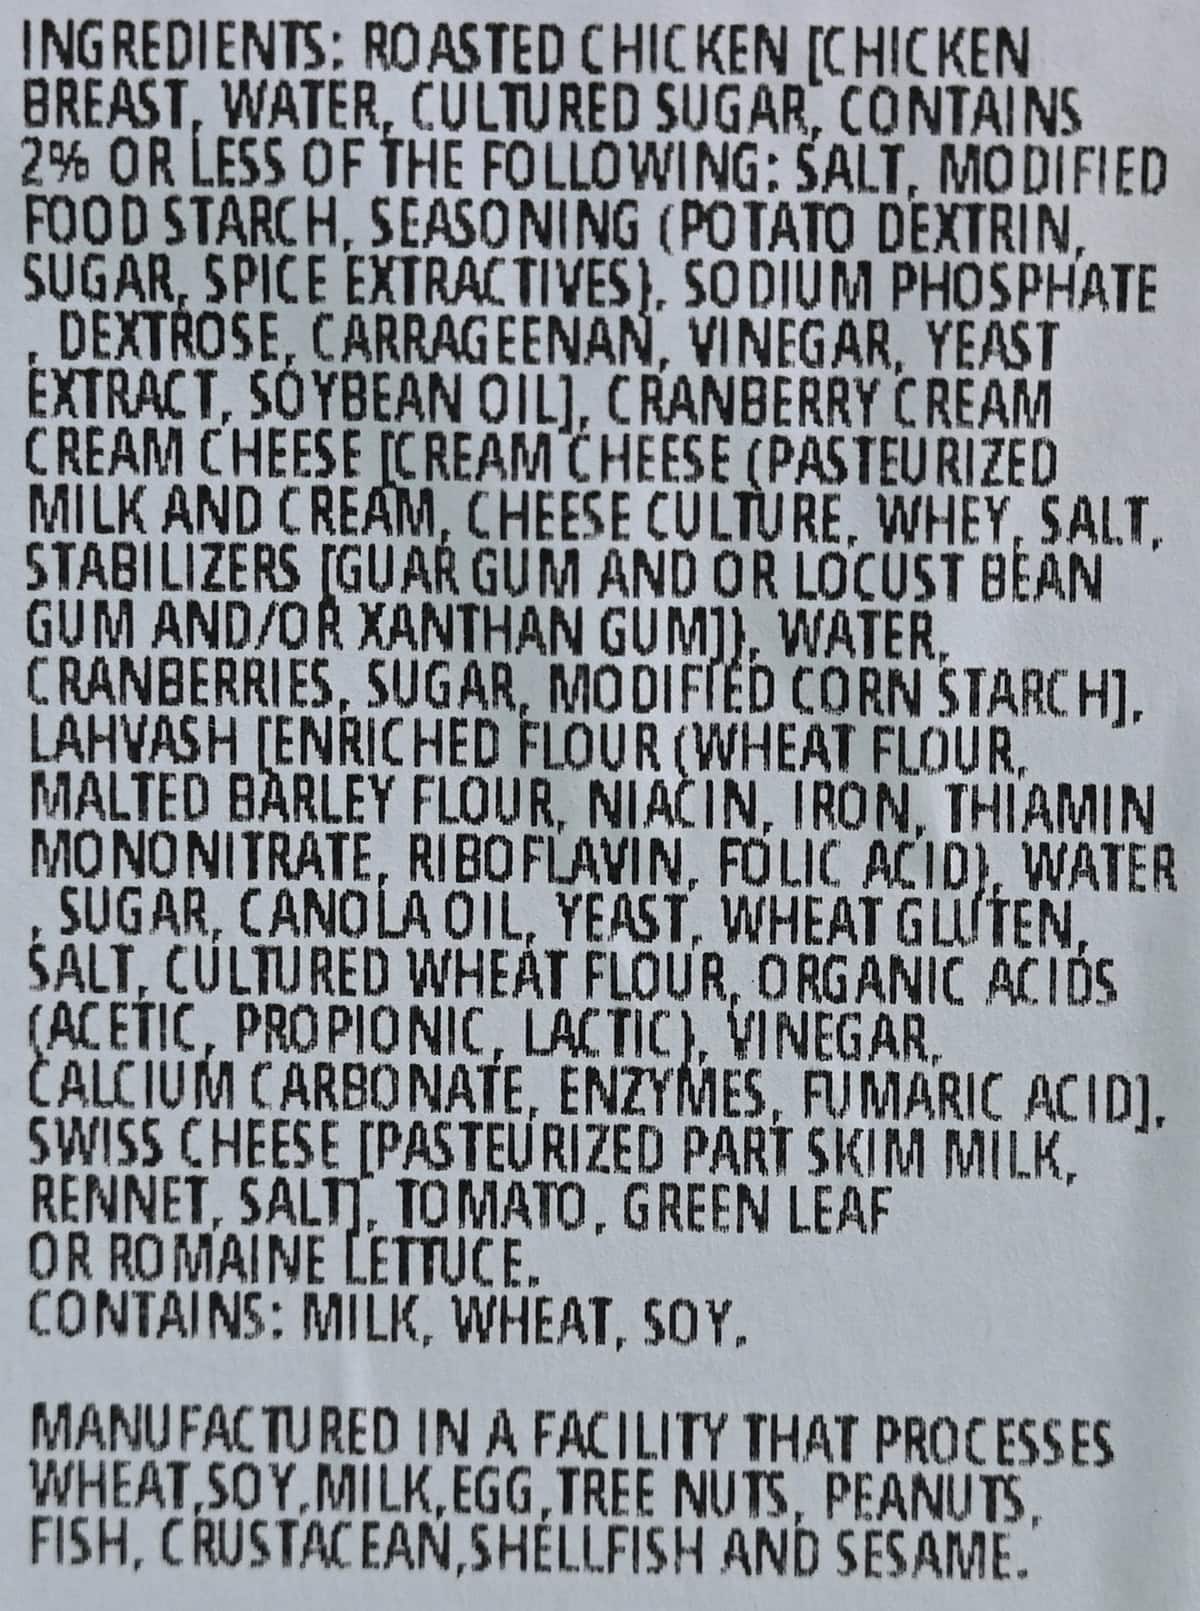 Image of the ingredients list for the rolls up from the packaging. 